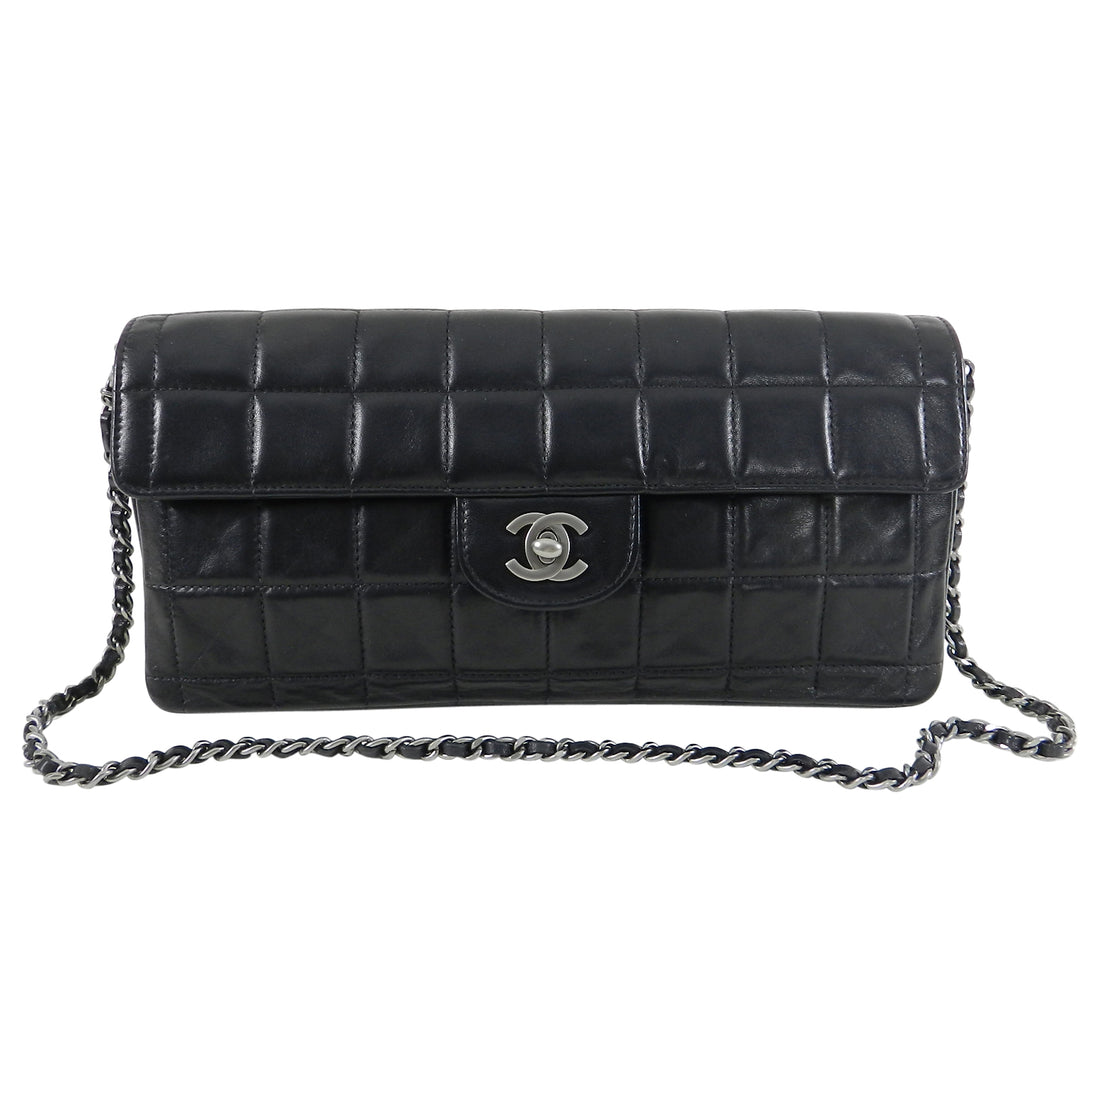 Chanel - Authenticated East West Chocolate Bar Handbag - Synthetic Black for Women, Very Good Condition